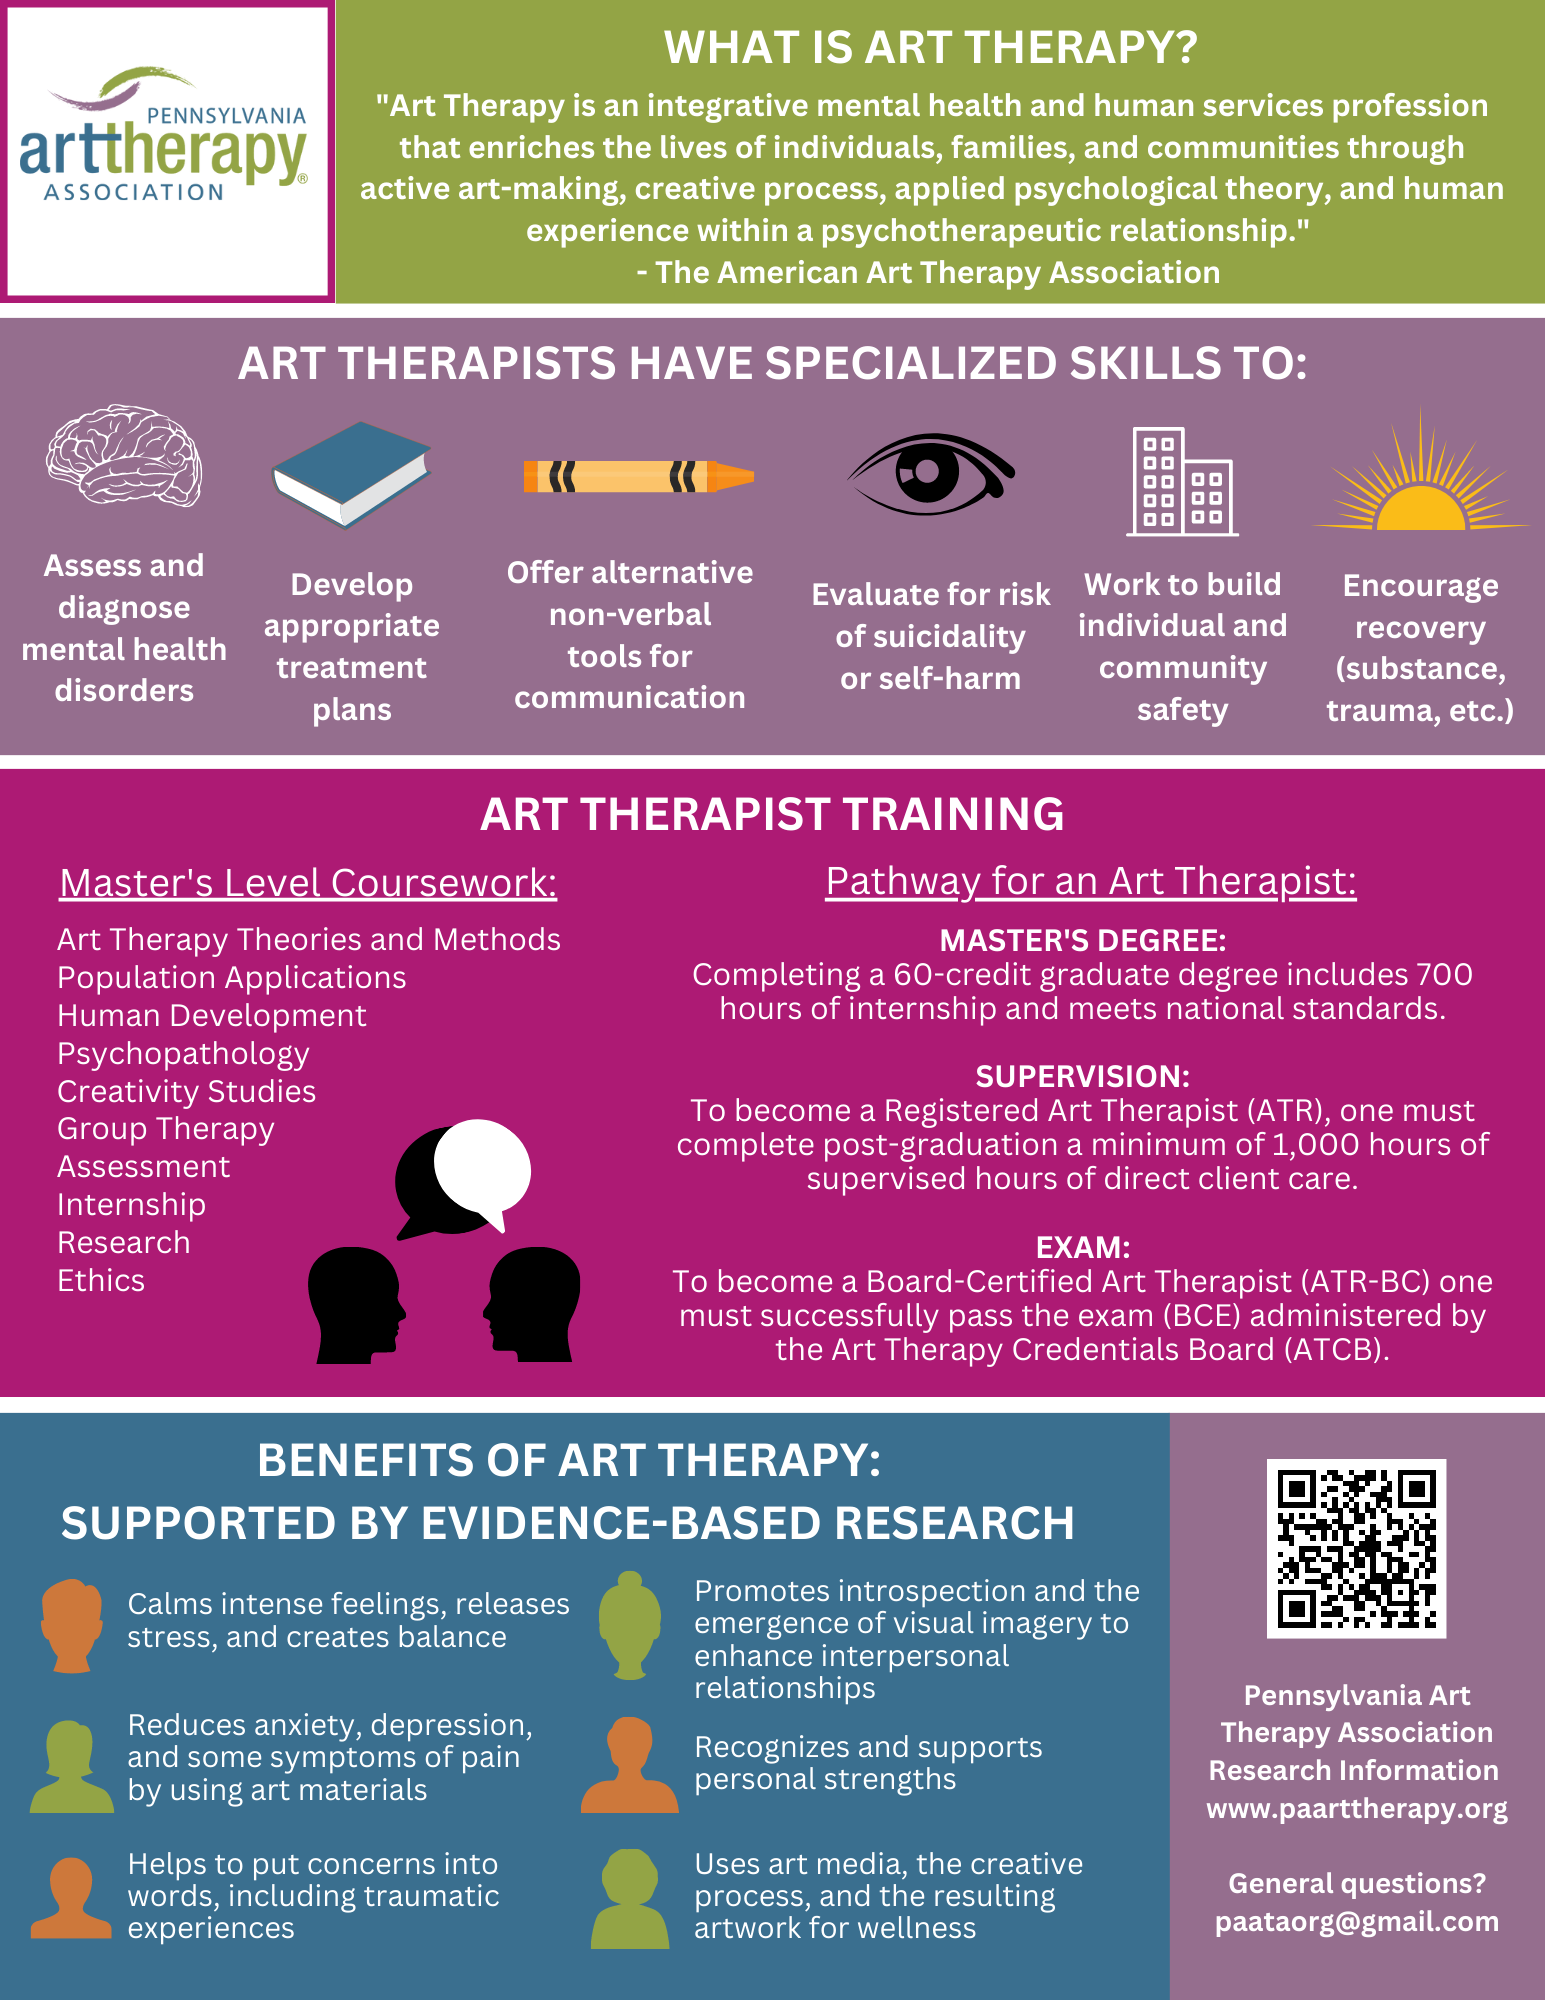 http://www.paarttherapy.org/uploads/1/2/1/7/121703237/infographic_5.12.23_page_1.png